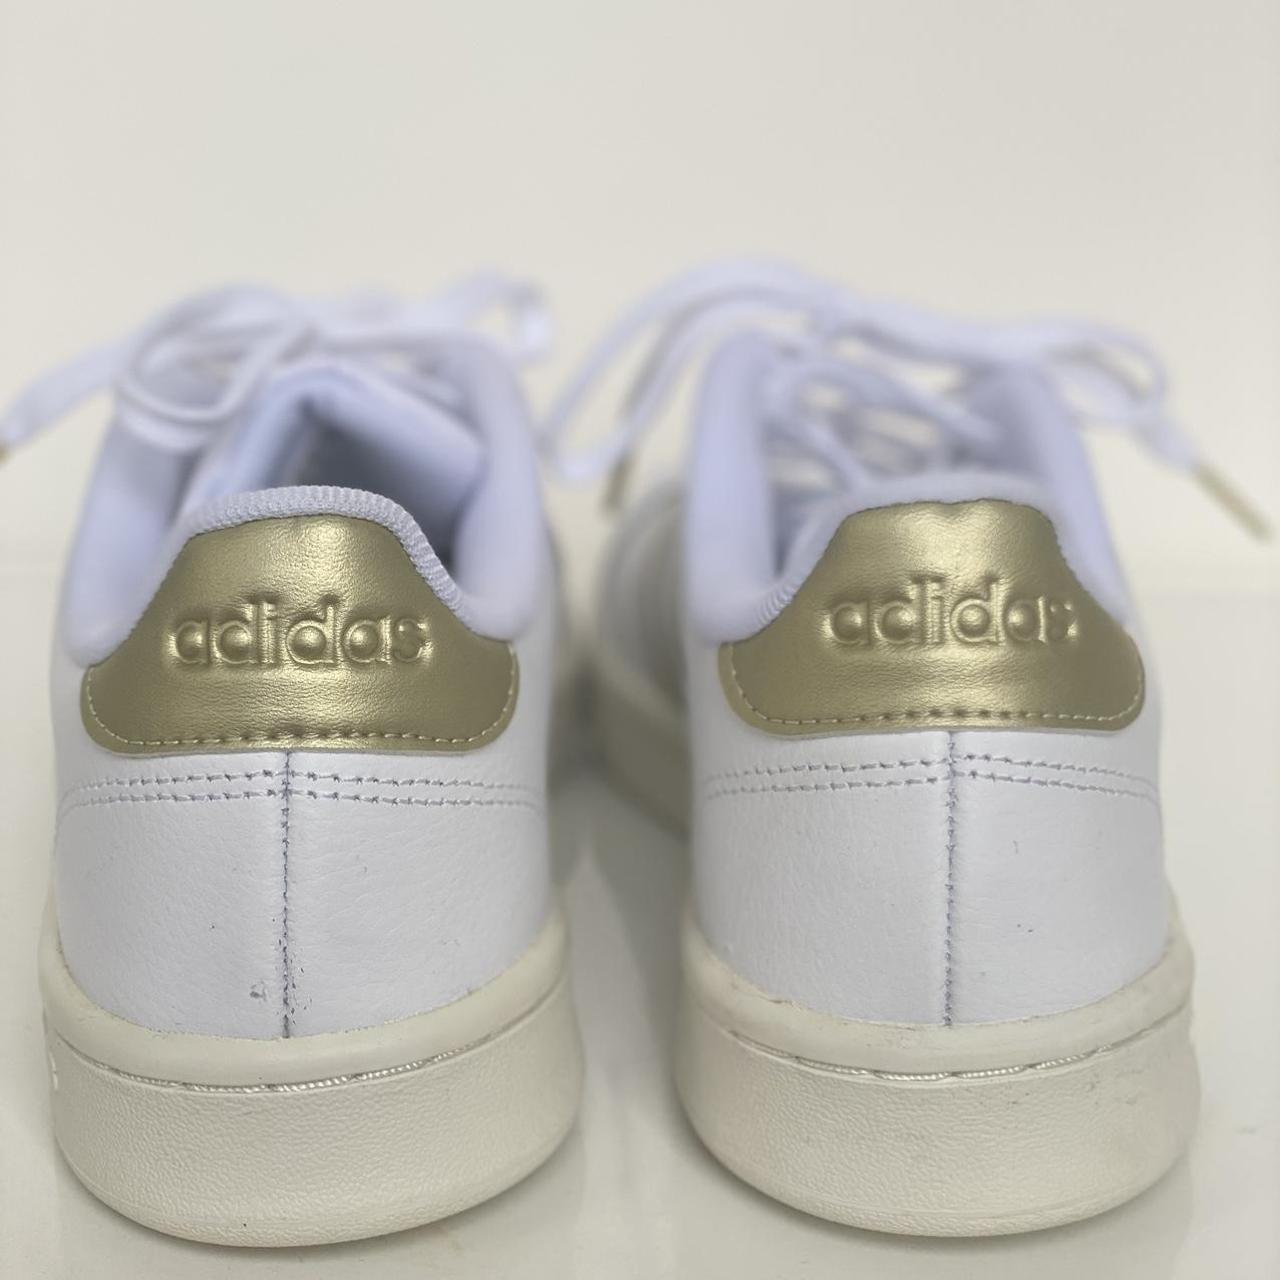 Adidas Women's White and Gold Trainers (4)